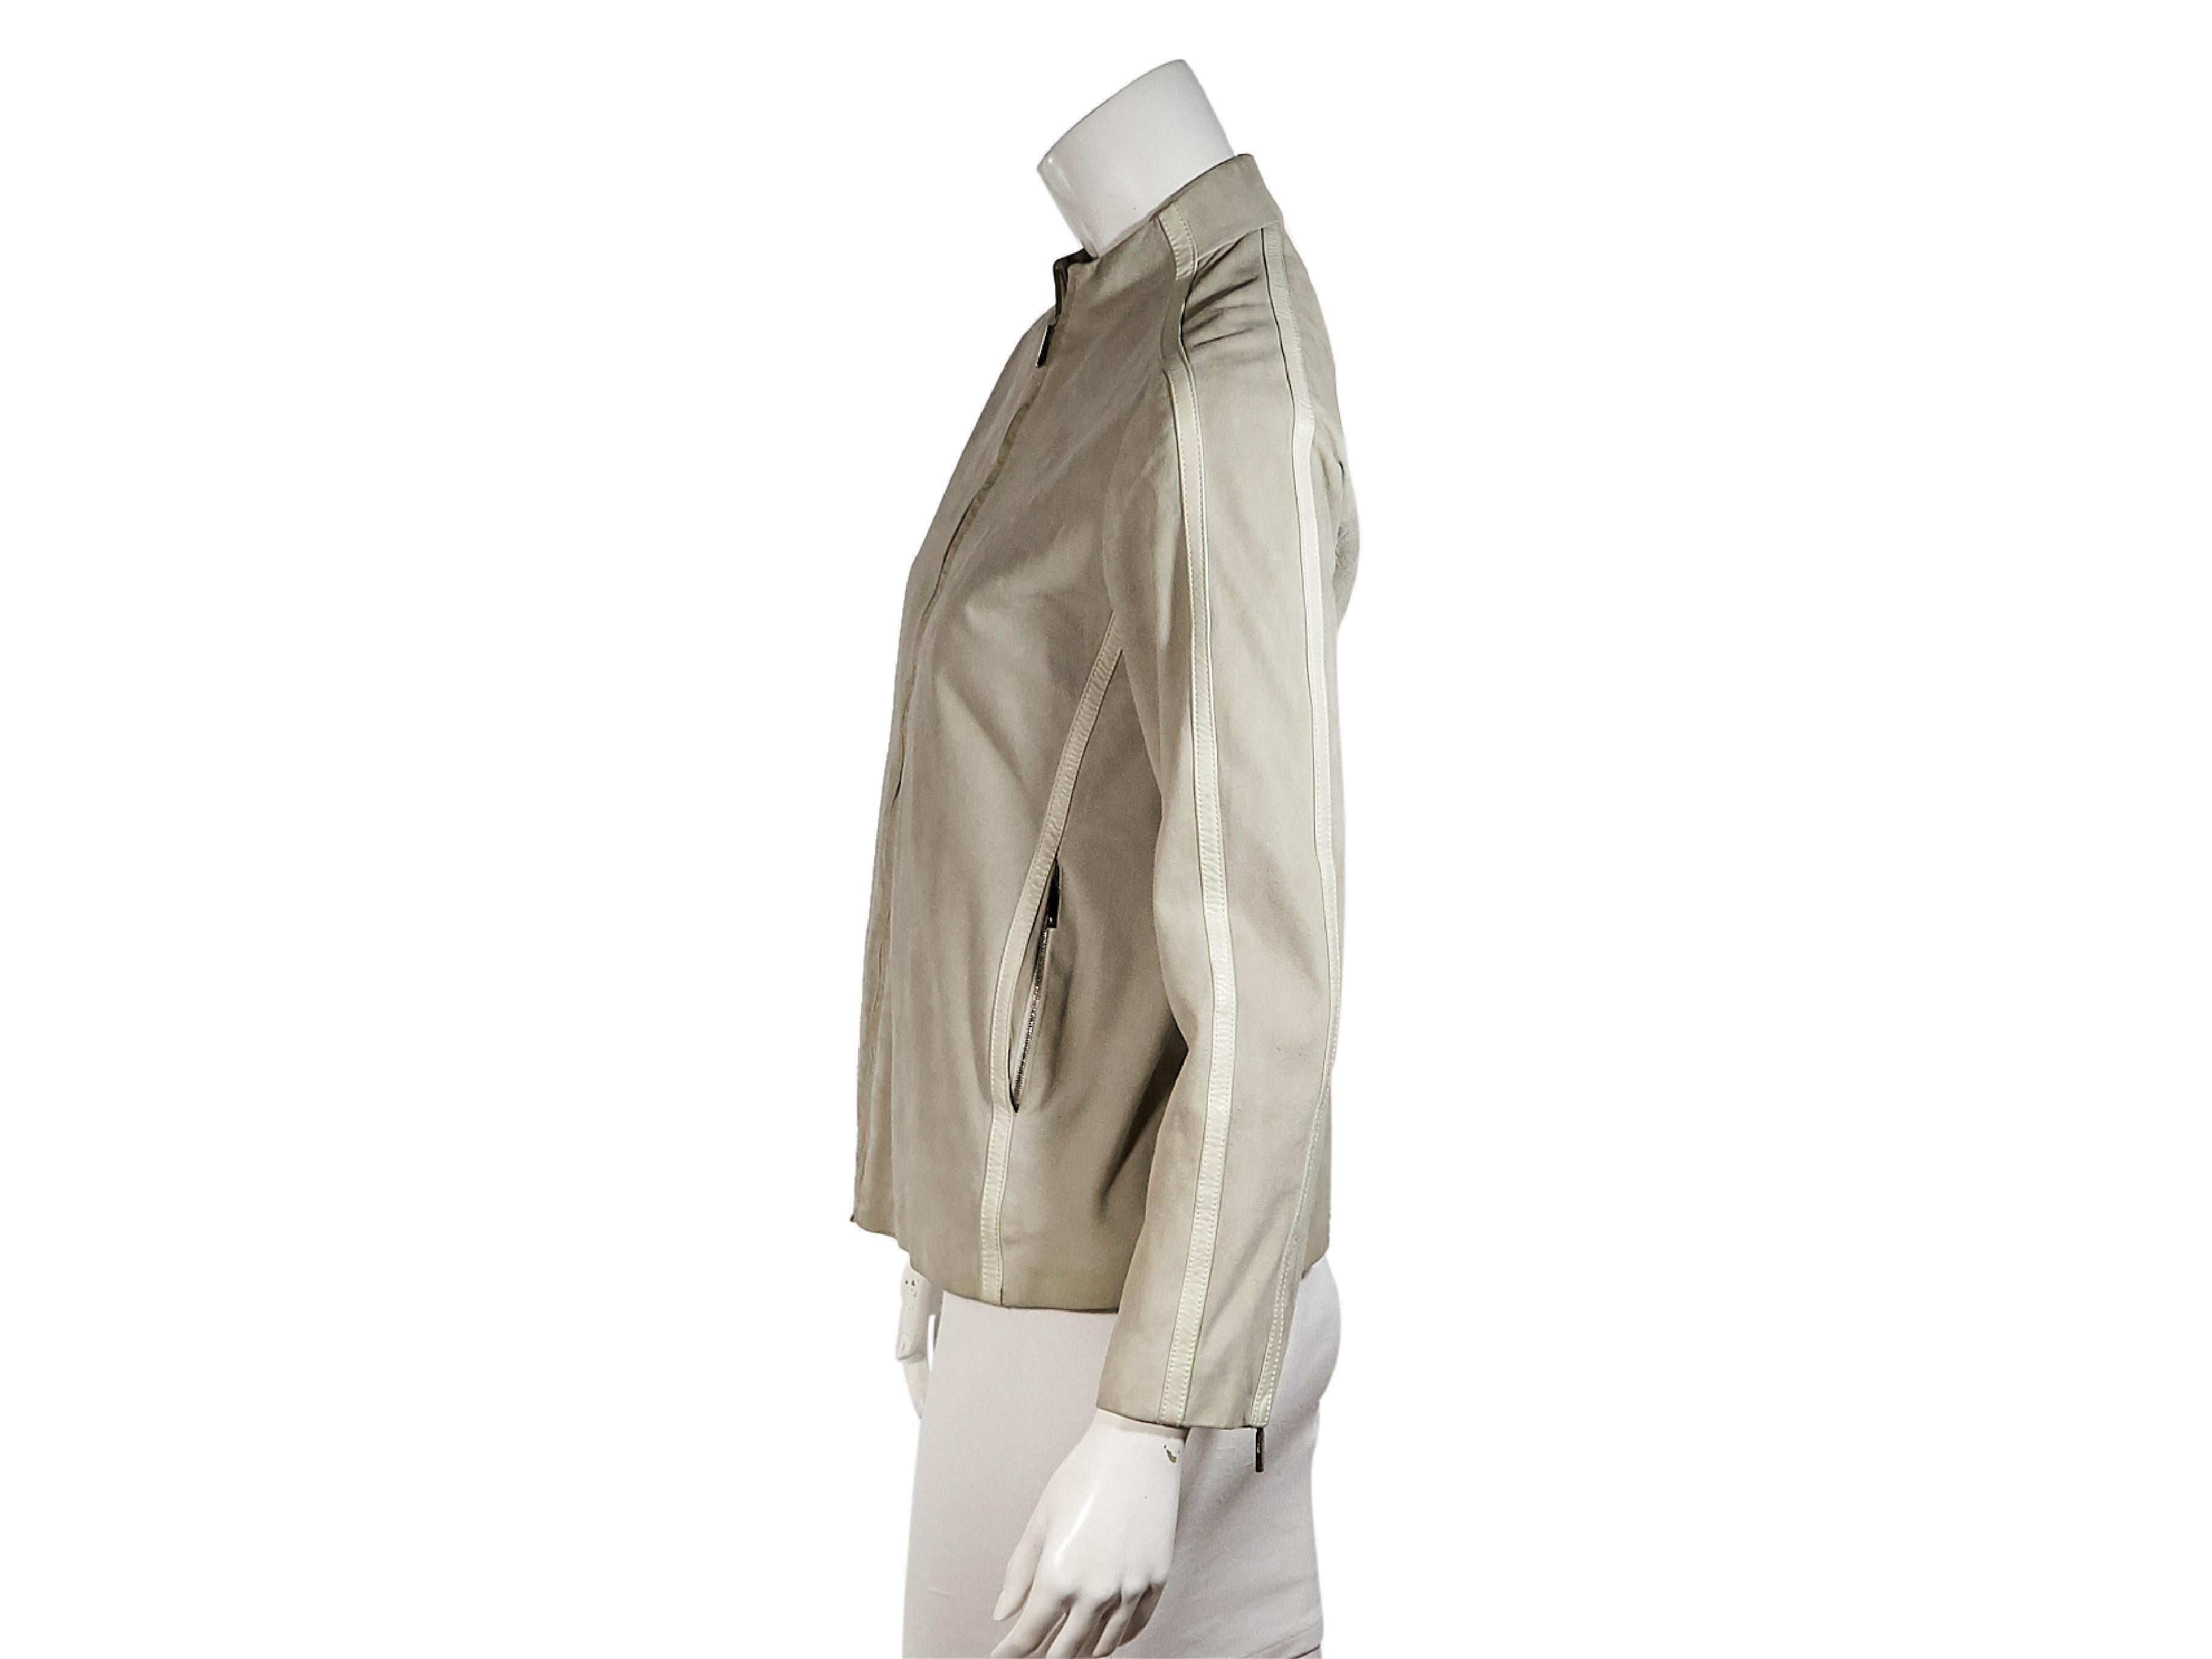 Product details:  Taupe suede jacket by Louis Vuitton.  Trimmed with leather.  Stand collar.  Long sleeves.  Zip cuffs.  Zip-front closure.  Label size IT 40.  36